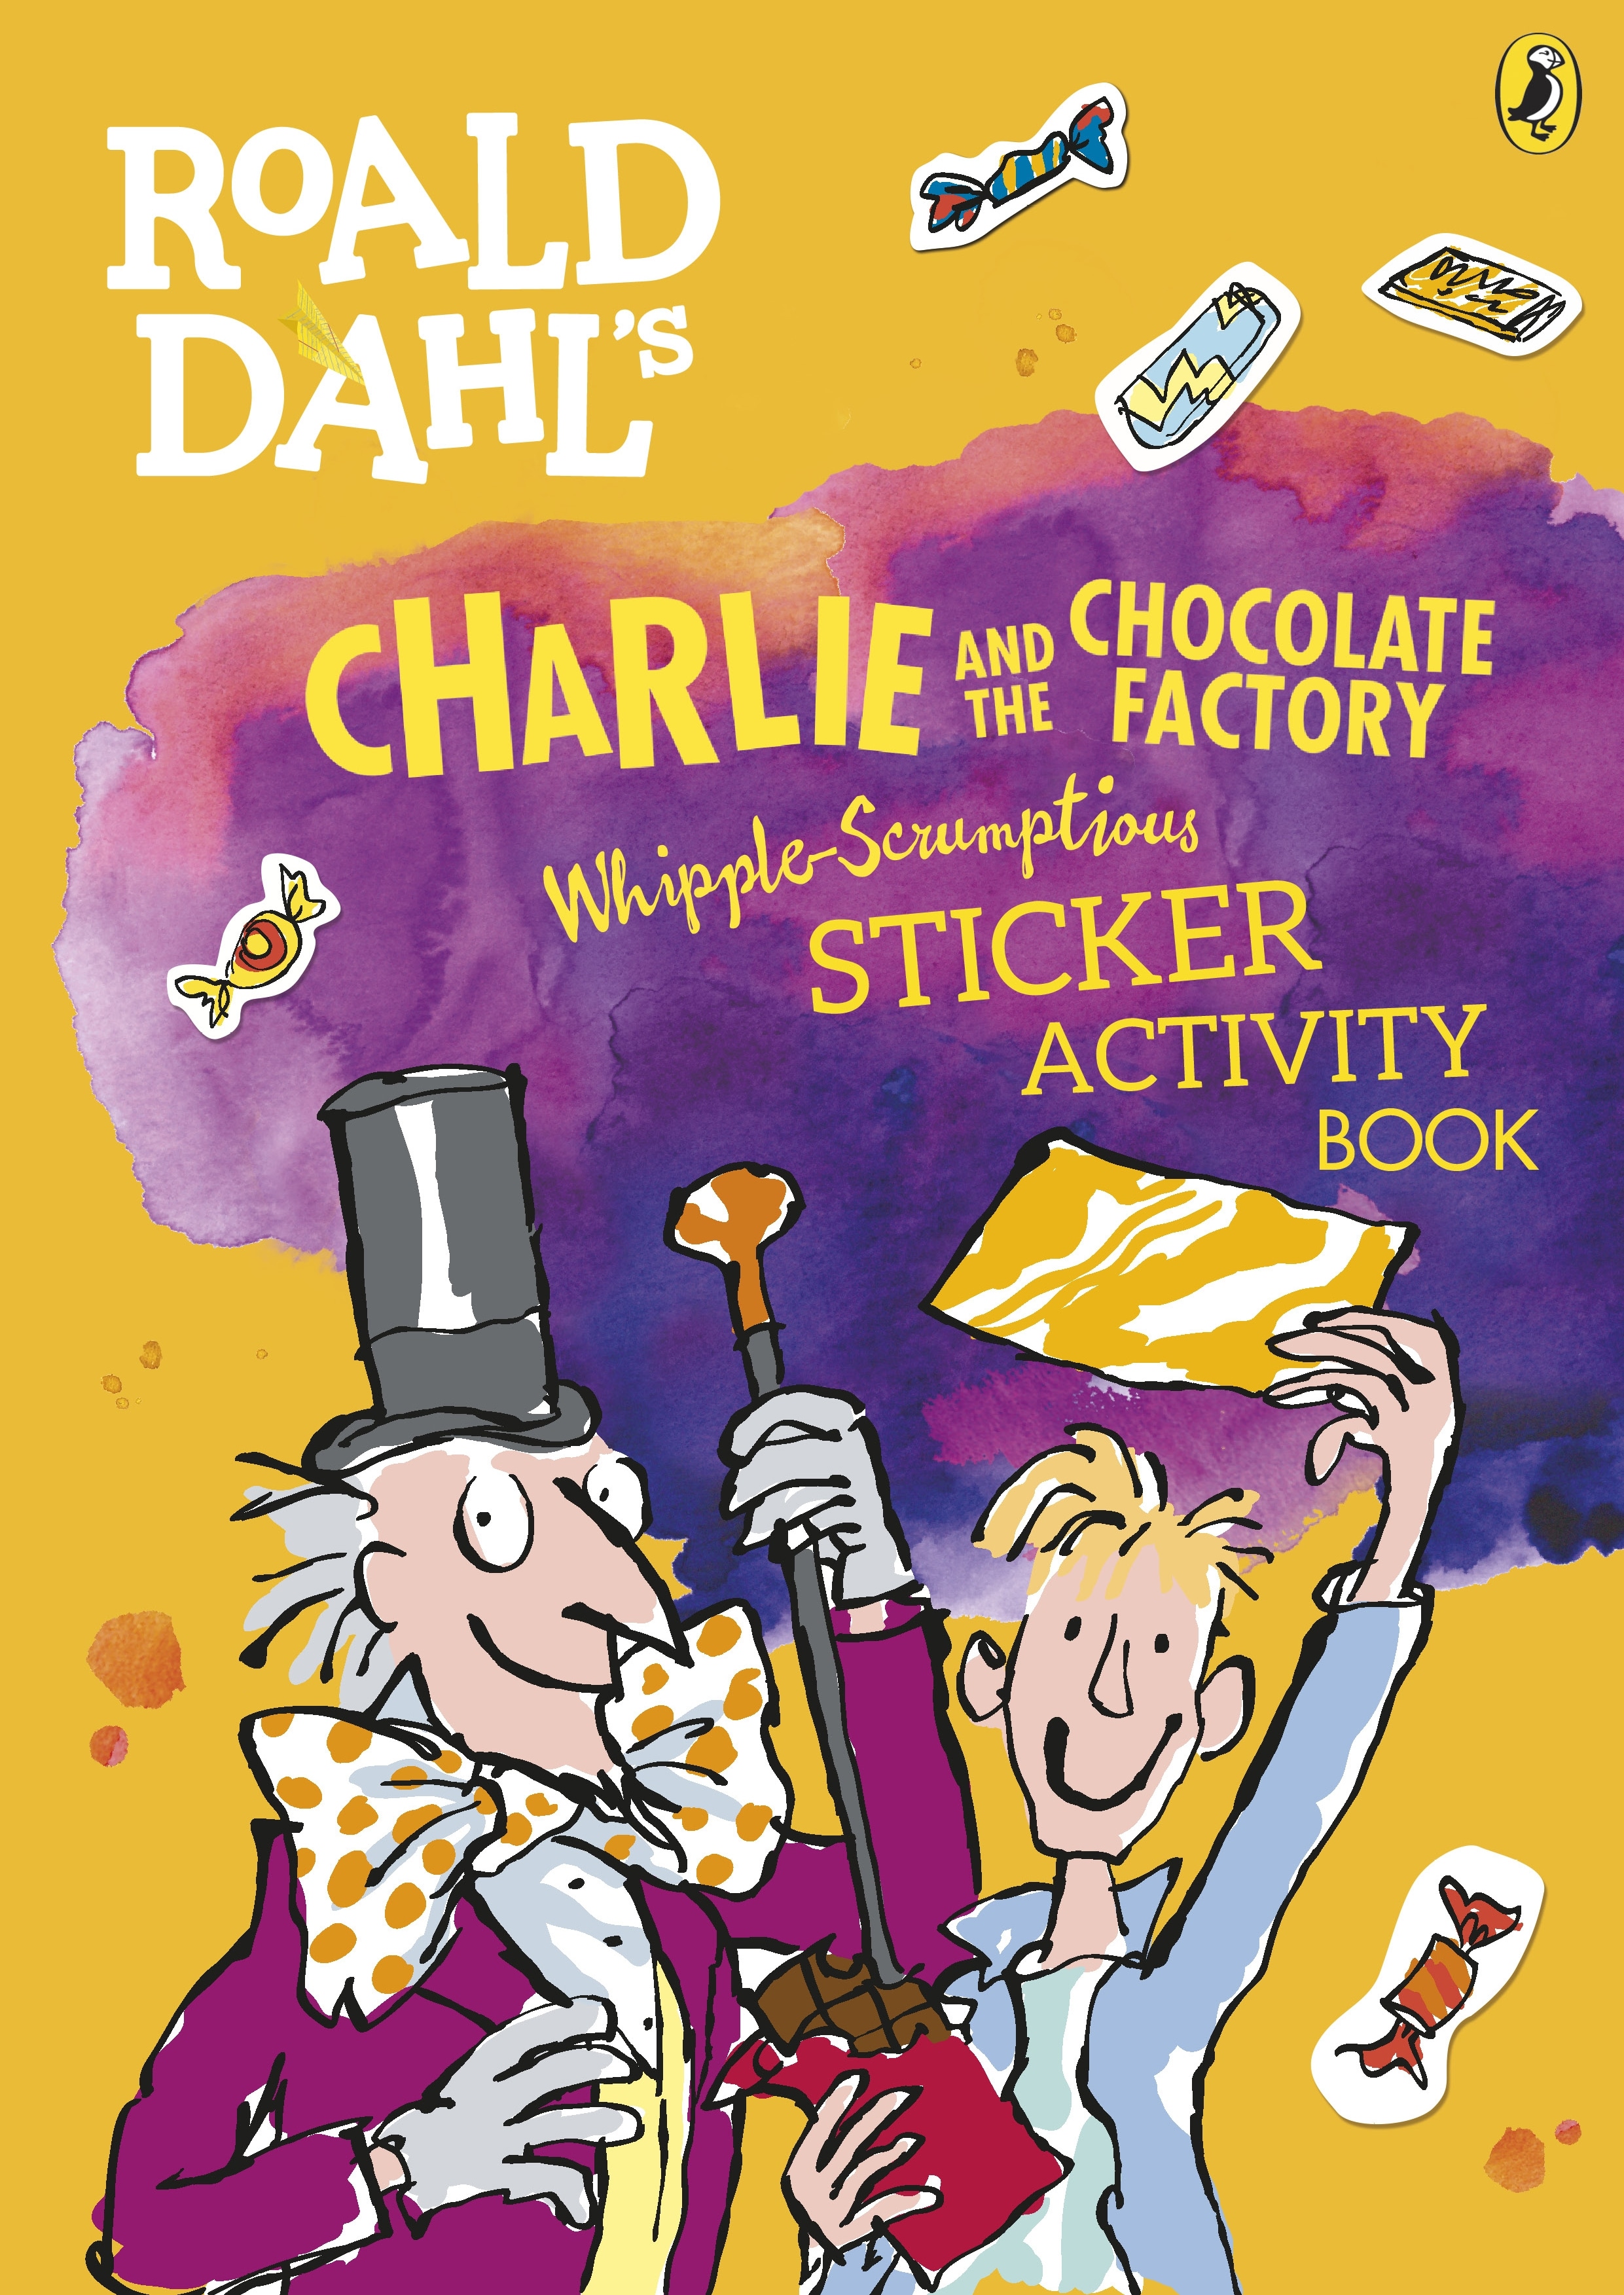 Book “Roald Dahl's Charlie and the Chocolate Factory Whipple-Scrumptious Sticker Activity Book” — May 18, 2017